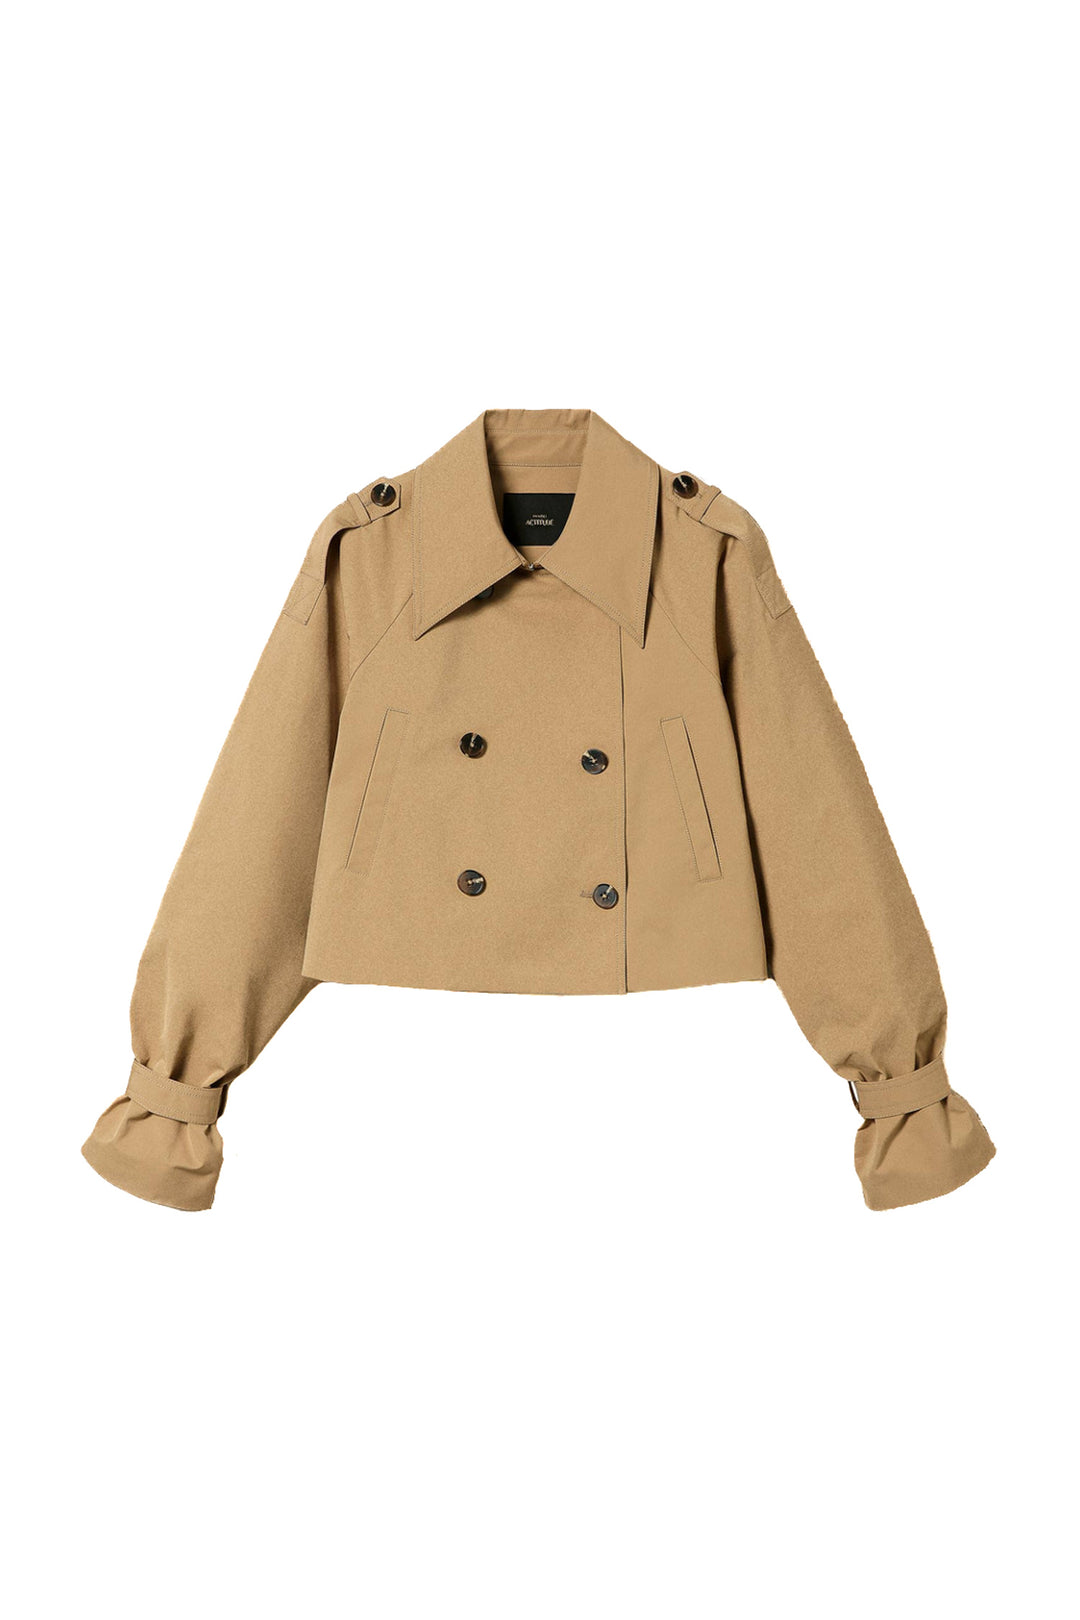 ACTITUDE TWINSET Giacca a trench marrone in gabardina - Mancinelli 1954